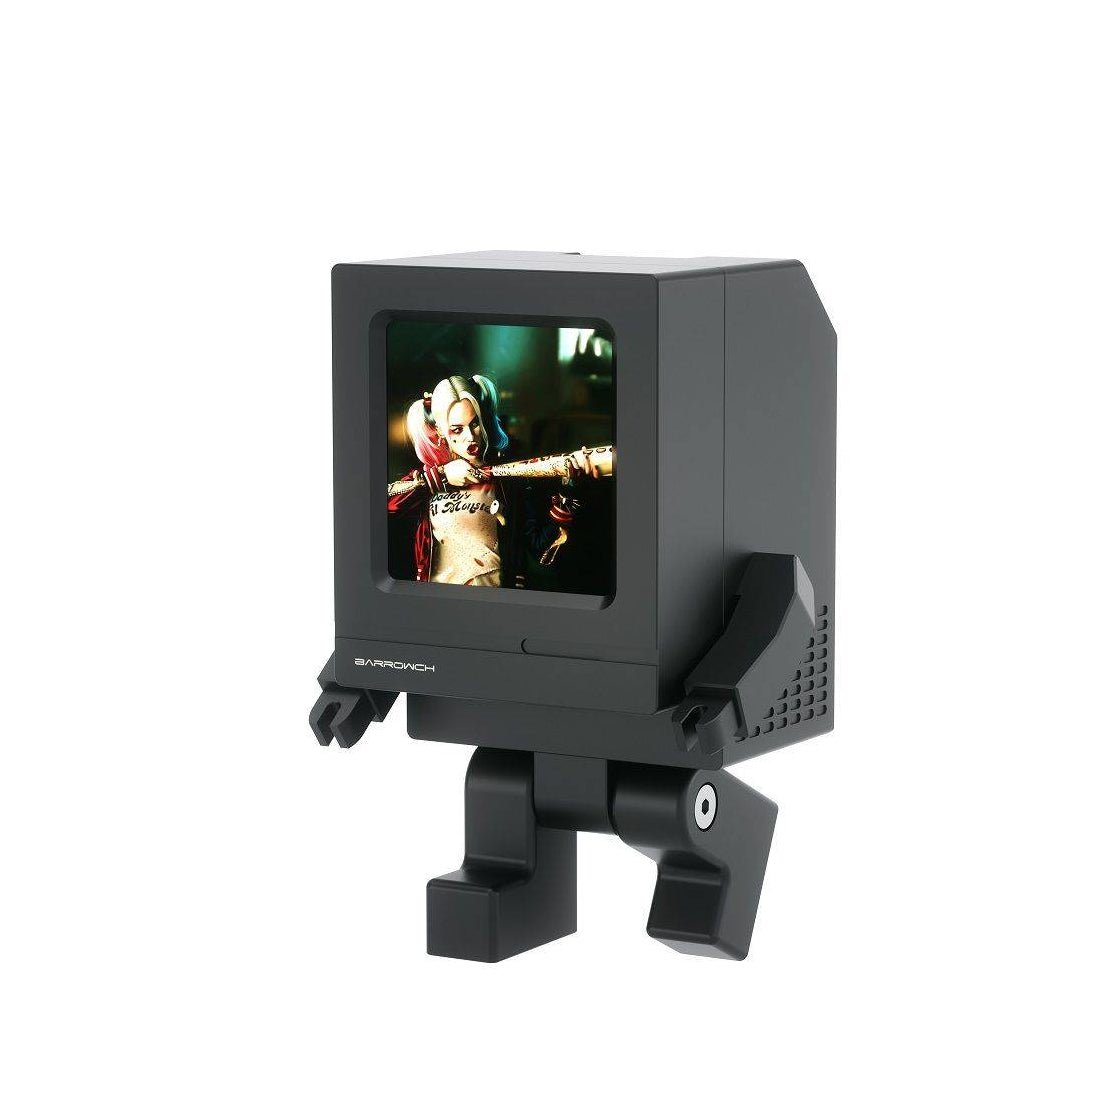 Barrowch Cyclops Mini Independent Limited Edition Monitor - Black - Store 974 | ستور ٩٧٤